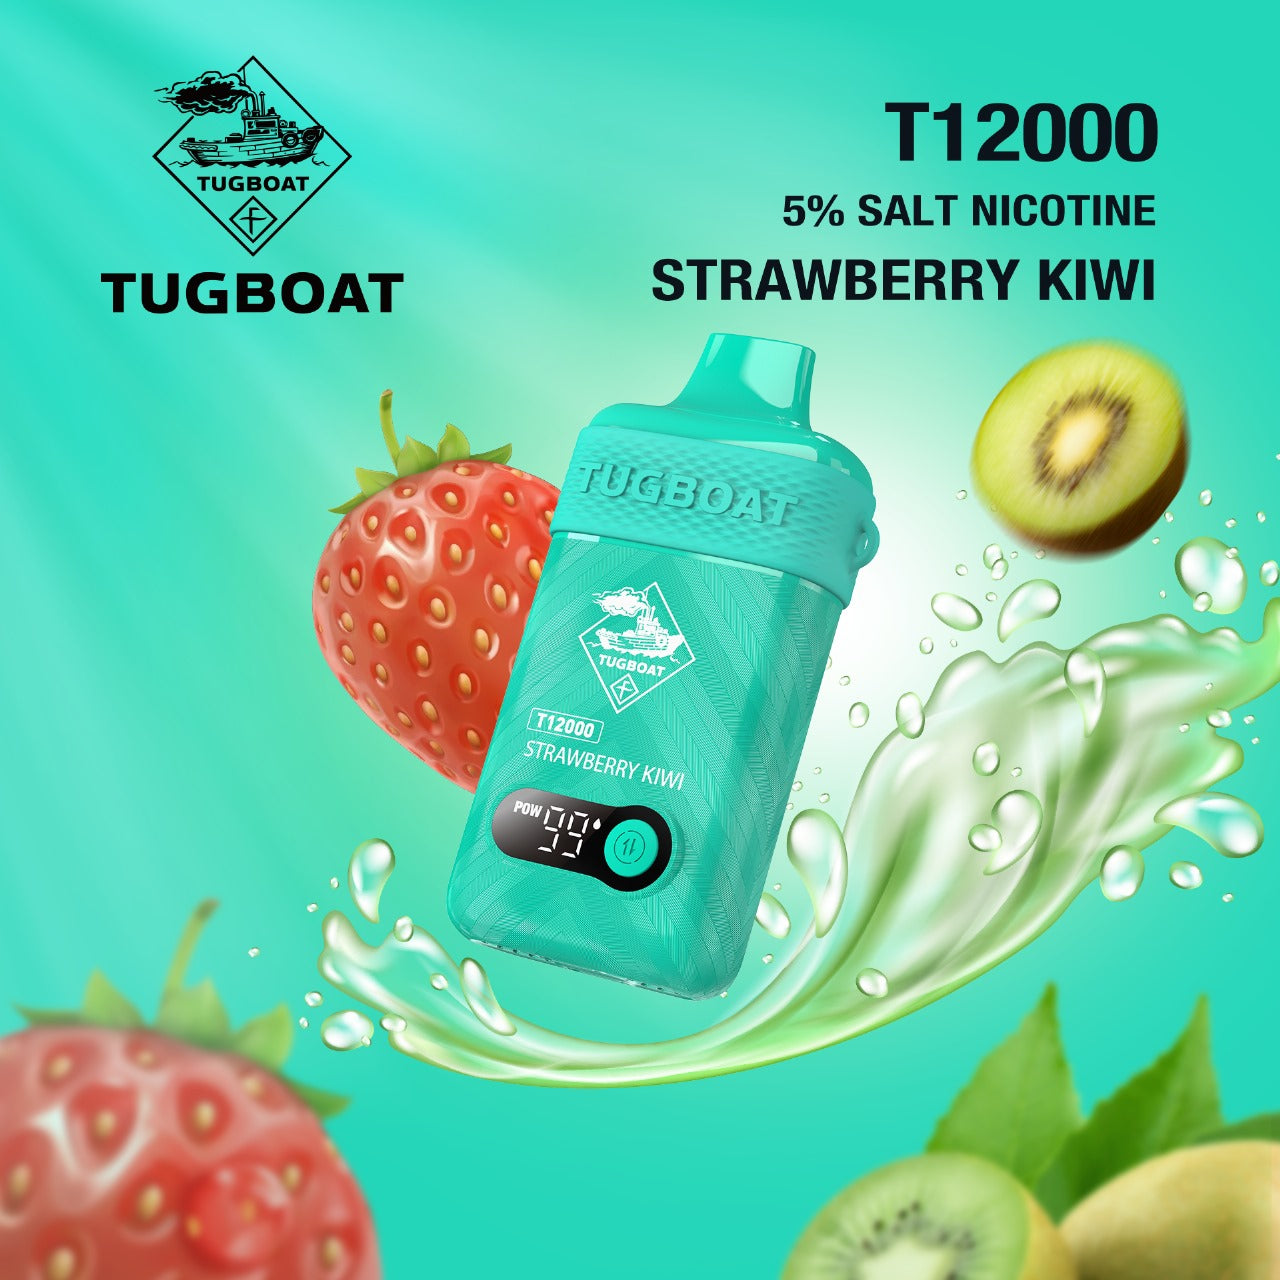 Tugboat T12000 RECHARGEABLE DISPOSABLE with Display